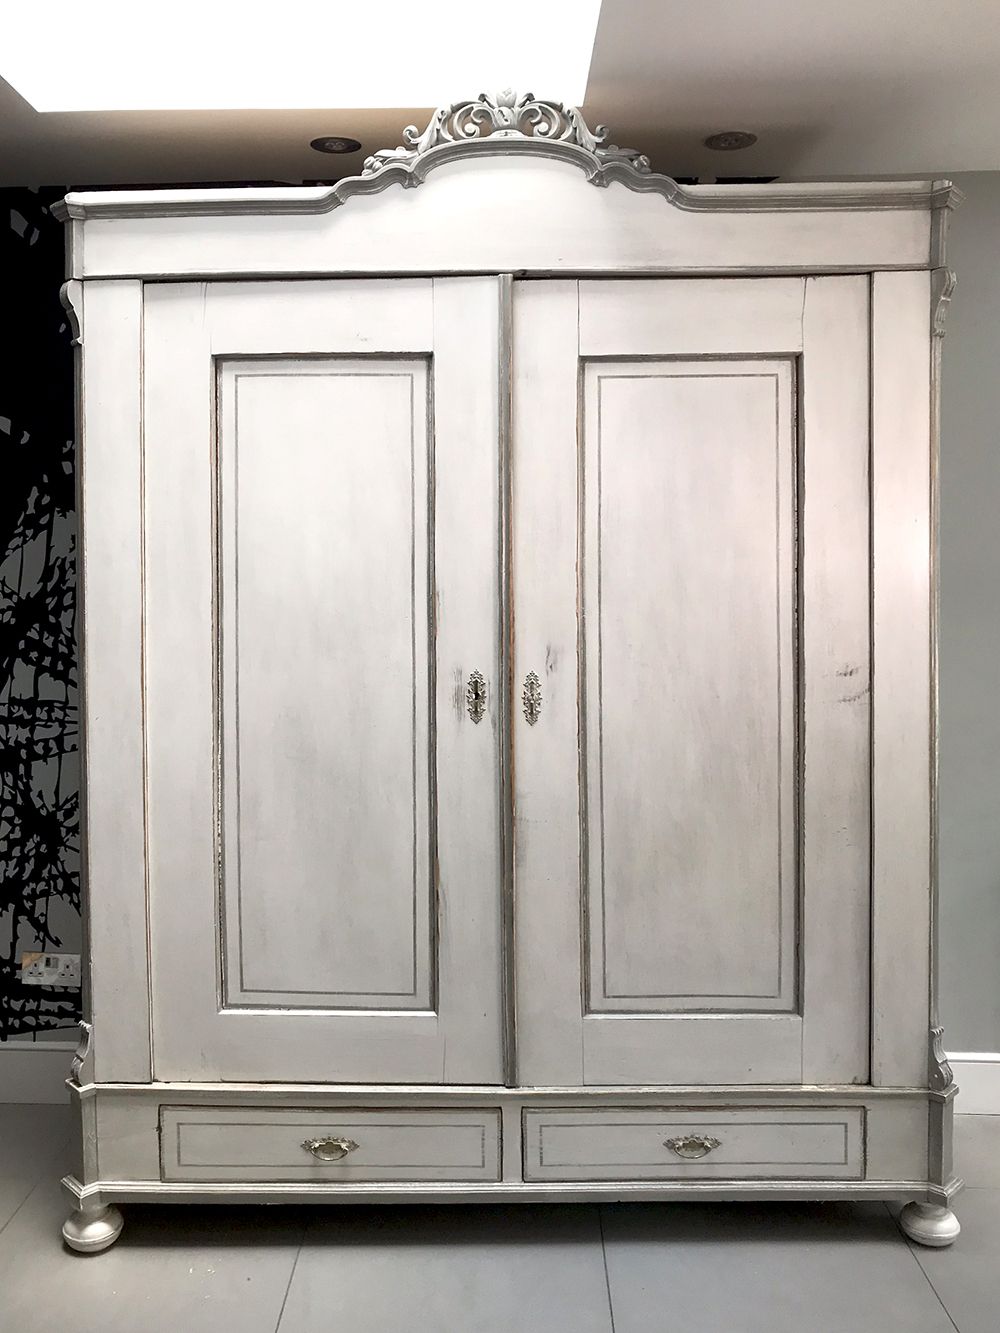 Antique French Painted Armoire – Sold | Napoleonrockefeller – Vintage And  Retro Furniture, Bespoke Hand Crafted Chairs And Seating Regarding Armoire French Wardrobes (Gallery 5 of 20)